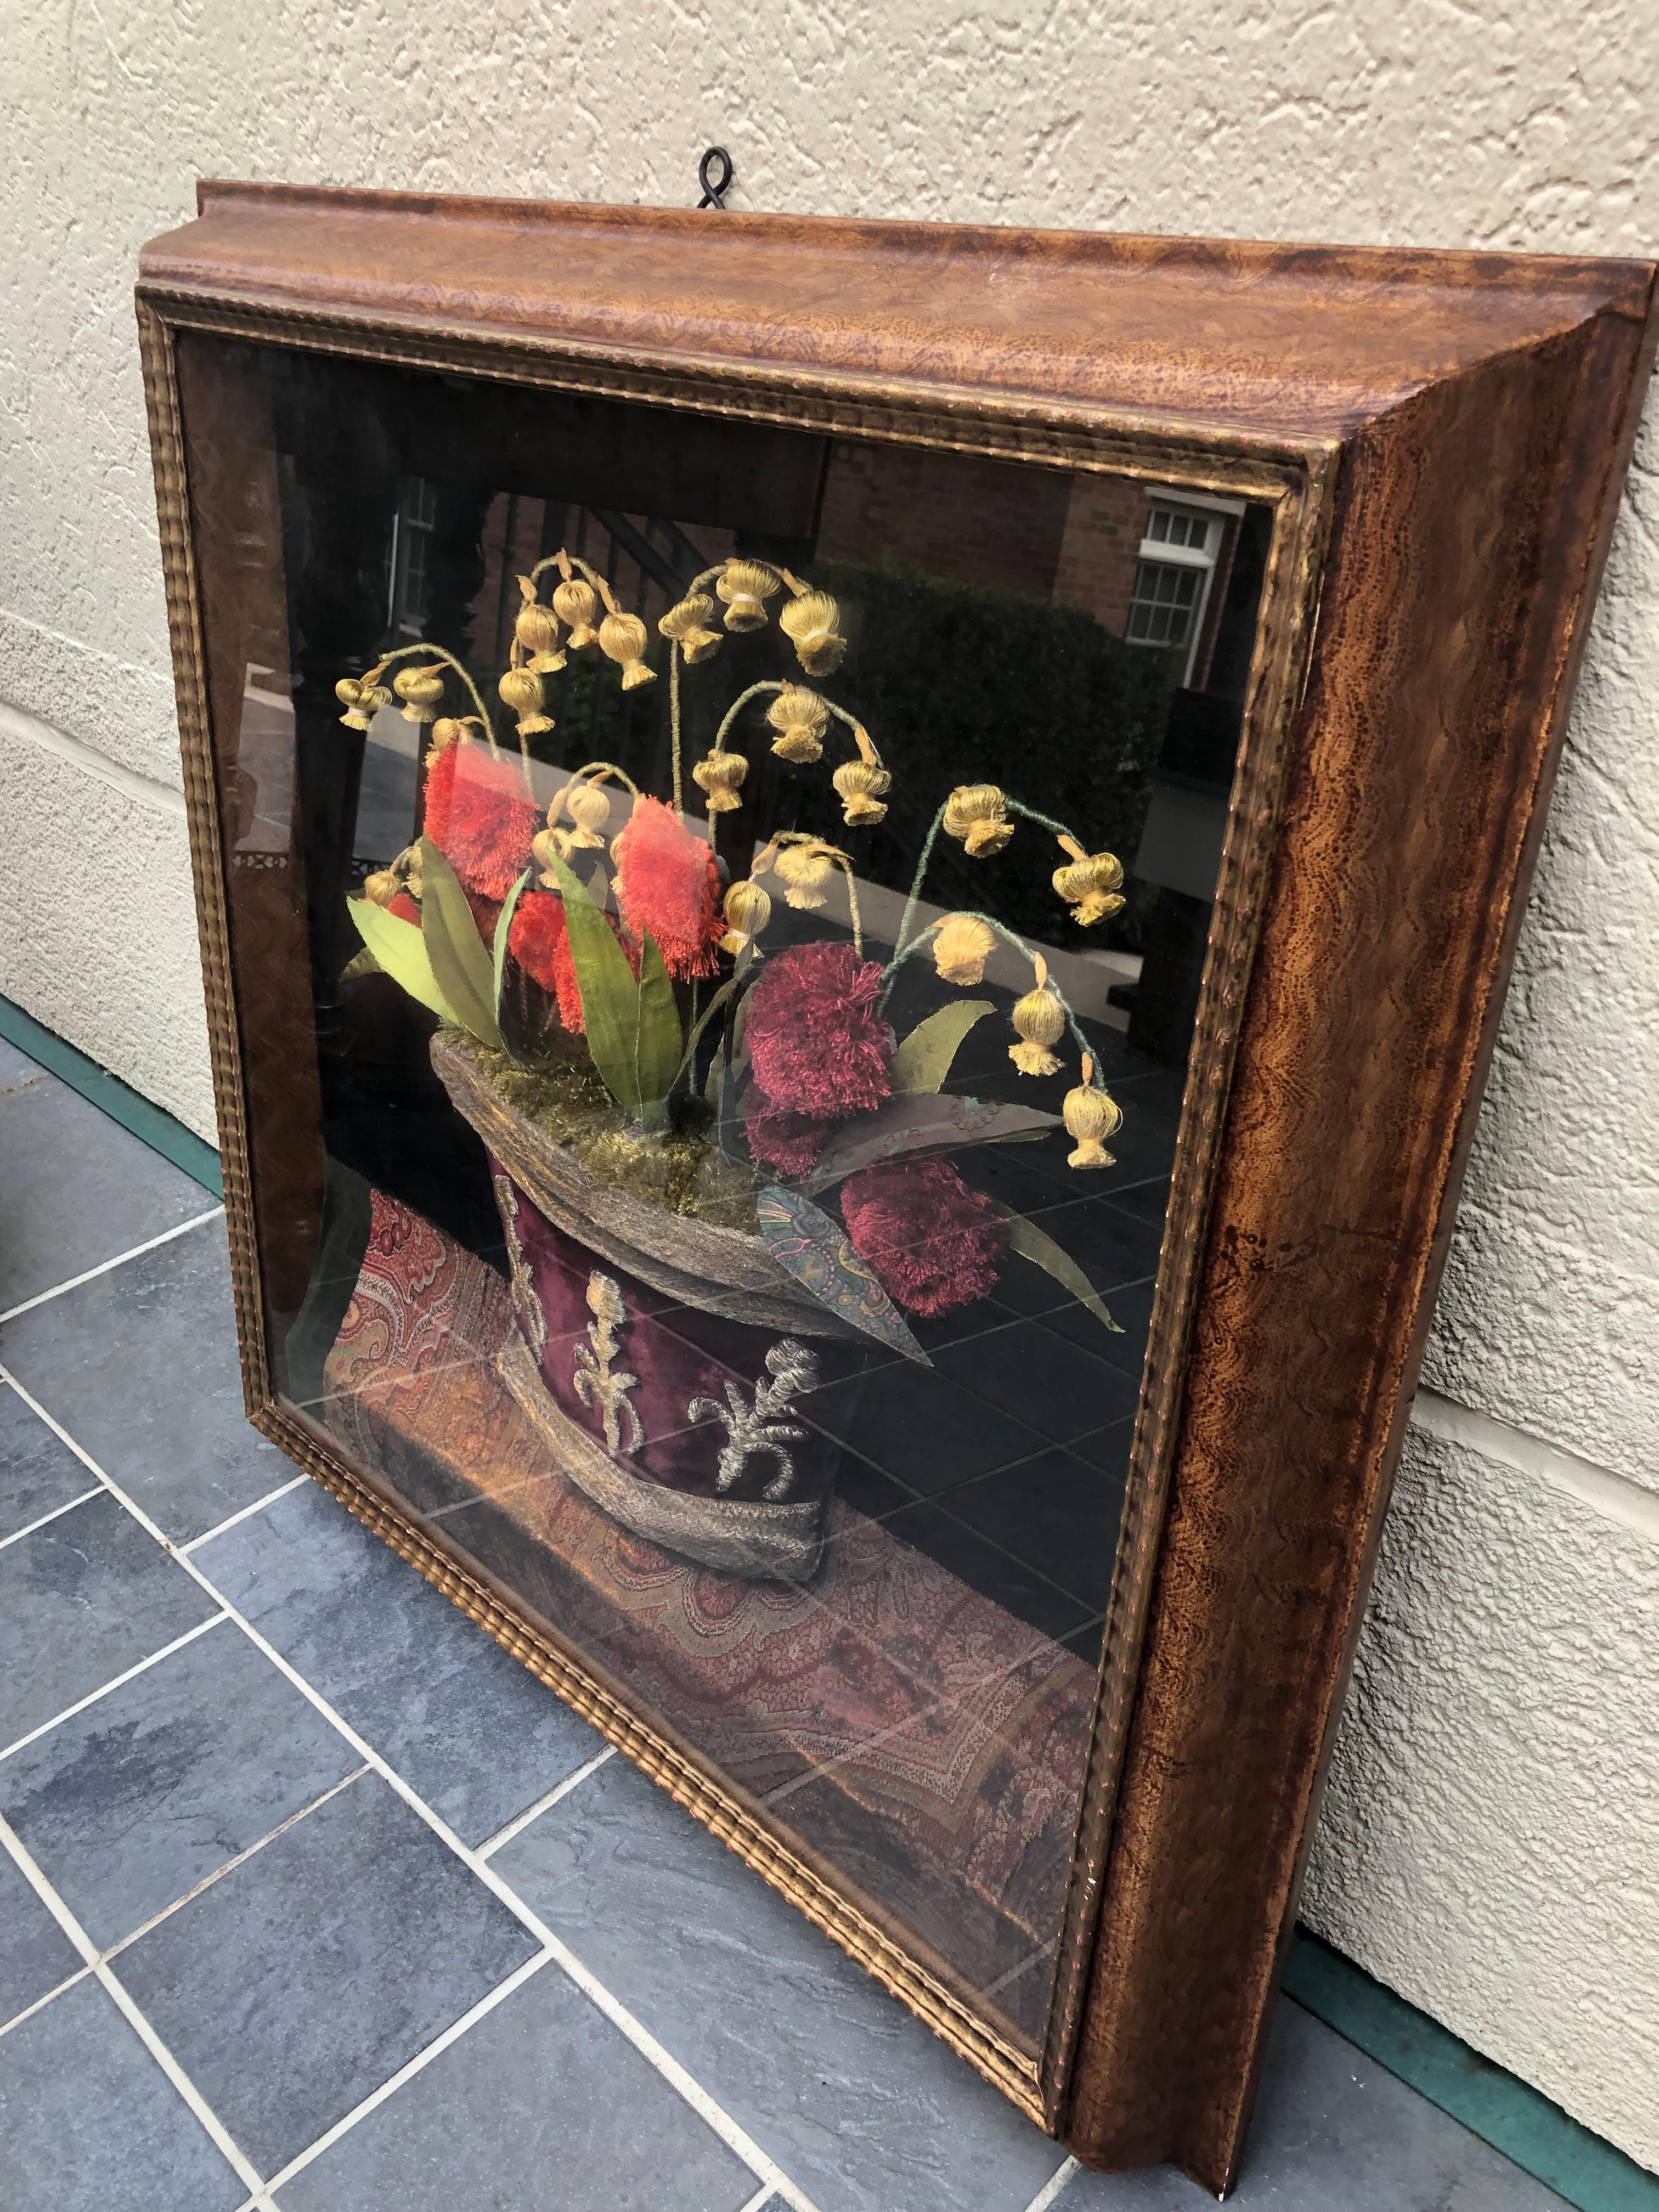 Unique Mixed Media Shadow Box flower botanical Art frame by Patrizia Medail

Showstopper large shadow box botanical framed artwork by Italian artist Patrizia Medail.  The artist’s works are created with antique fabric fragments and other mixed media